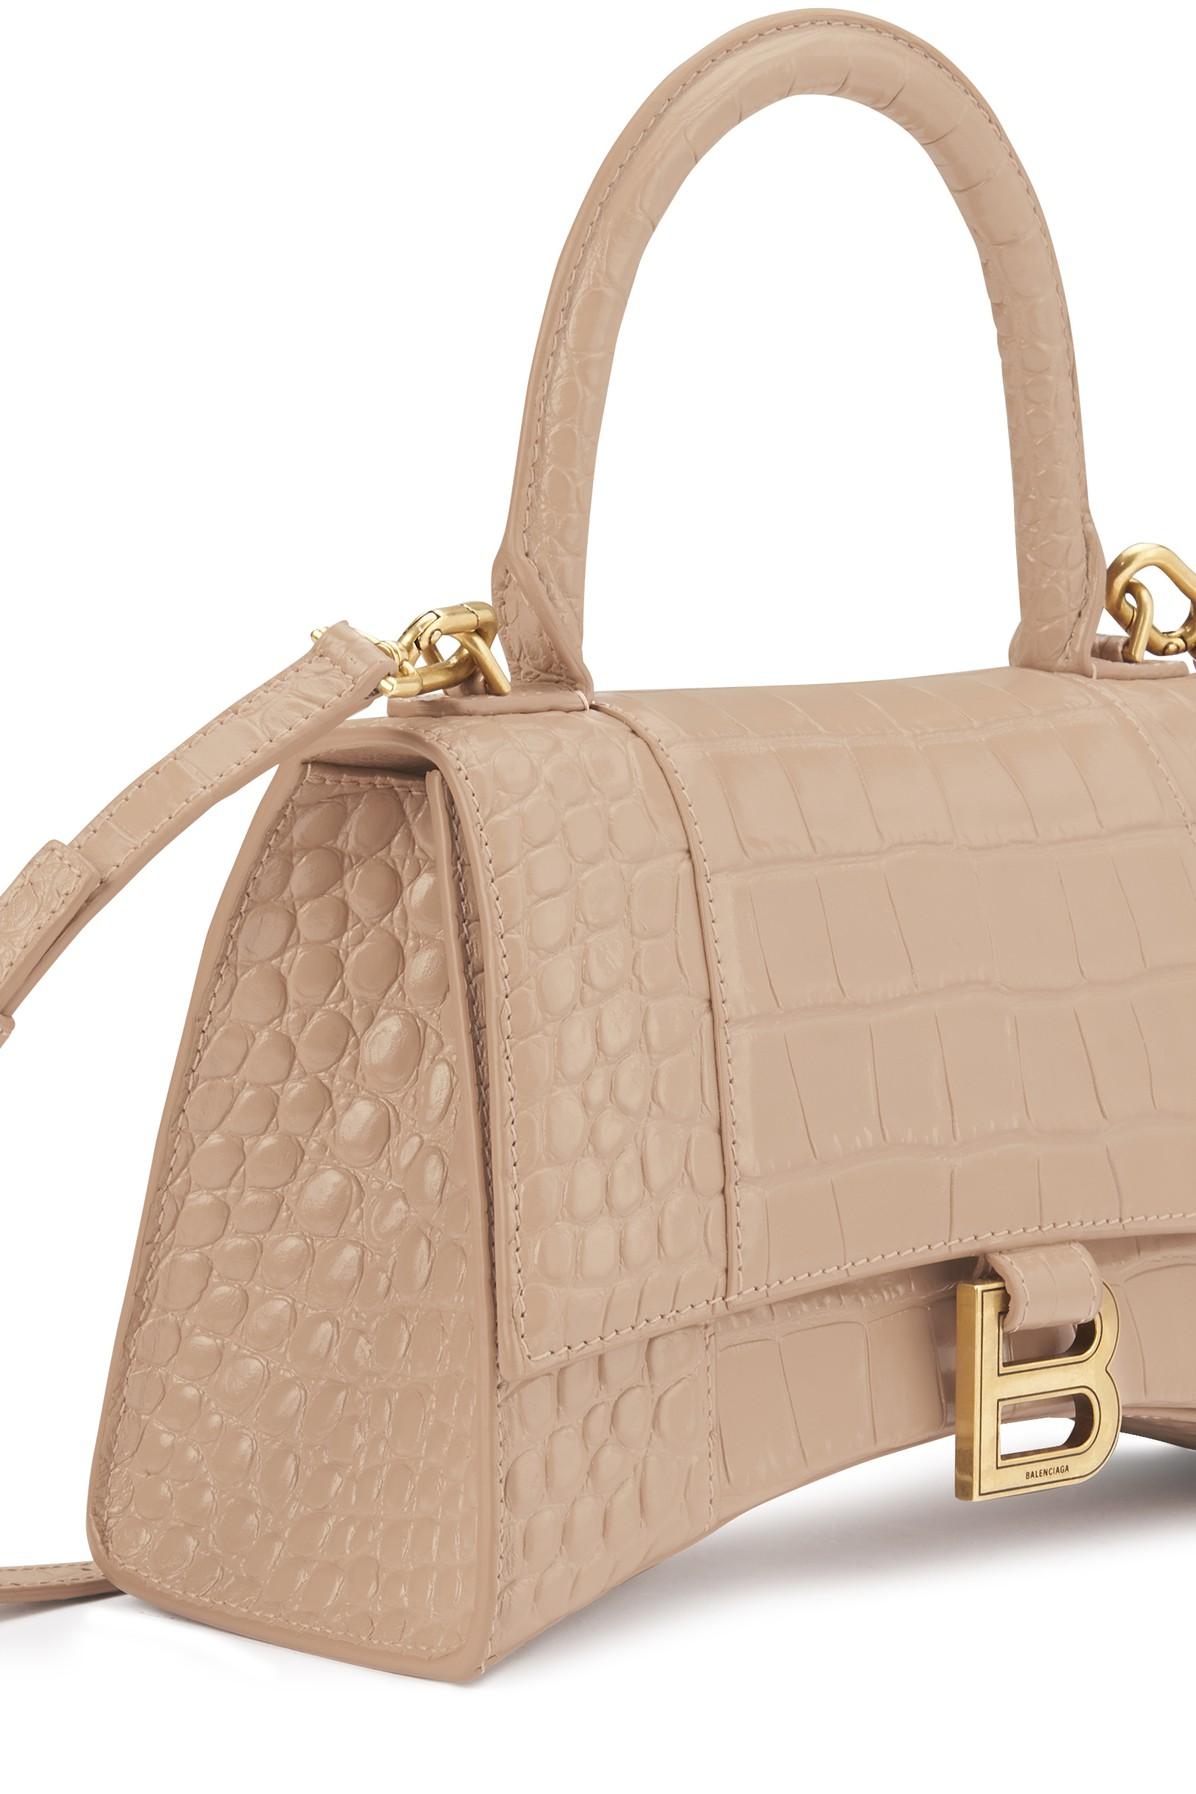 Reviewing My New Balenciaga Hourglass Bag from Italist - PurseBlog